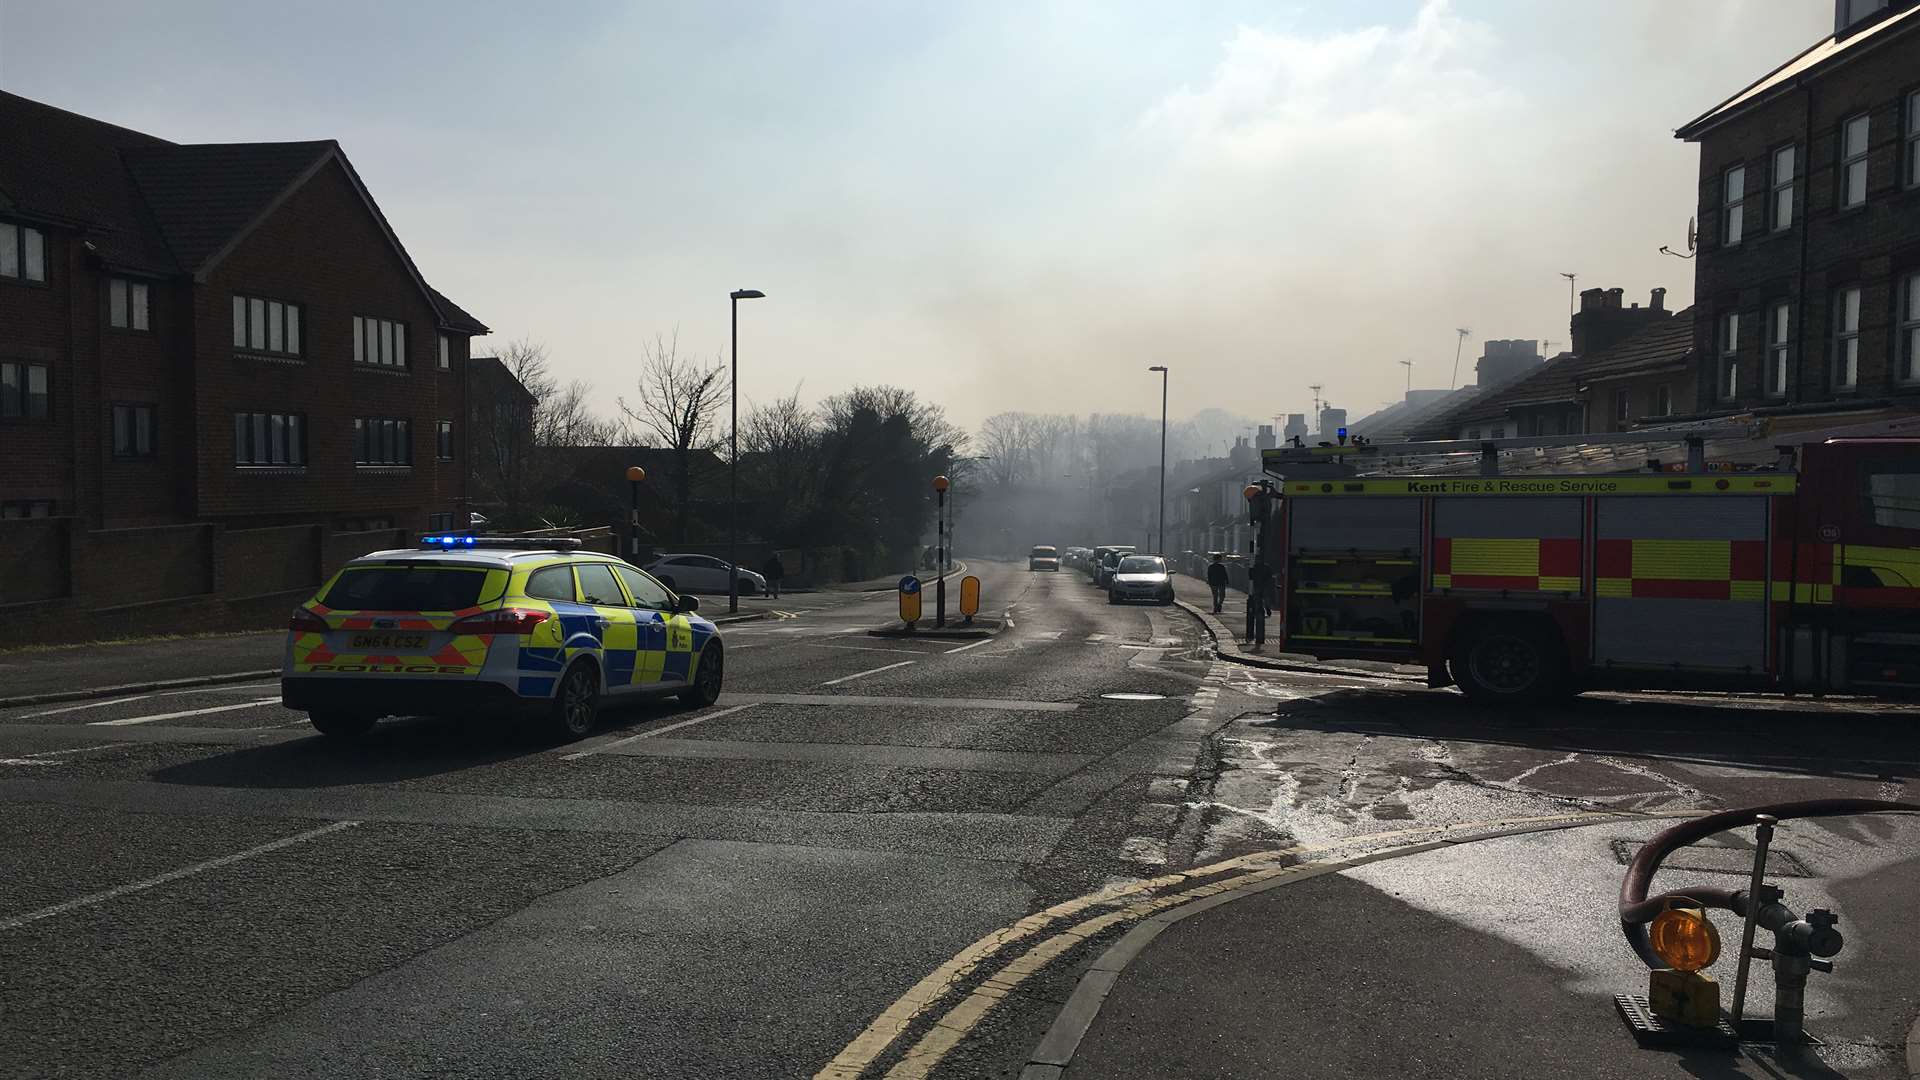 Smoke is drifting across the road and filling the air around the scene. Picture: Beccy Pollard